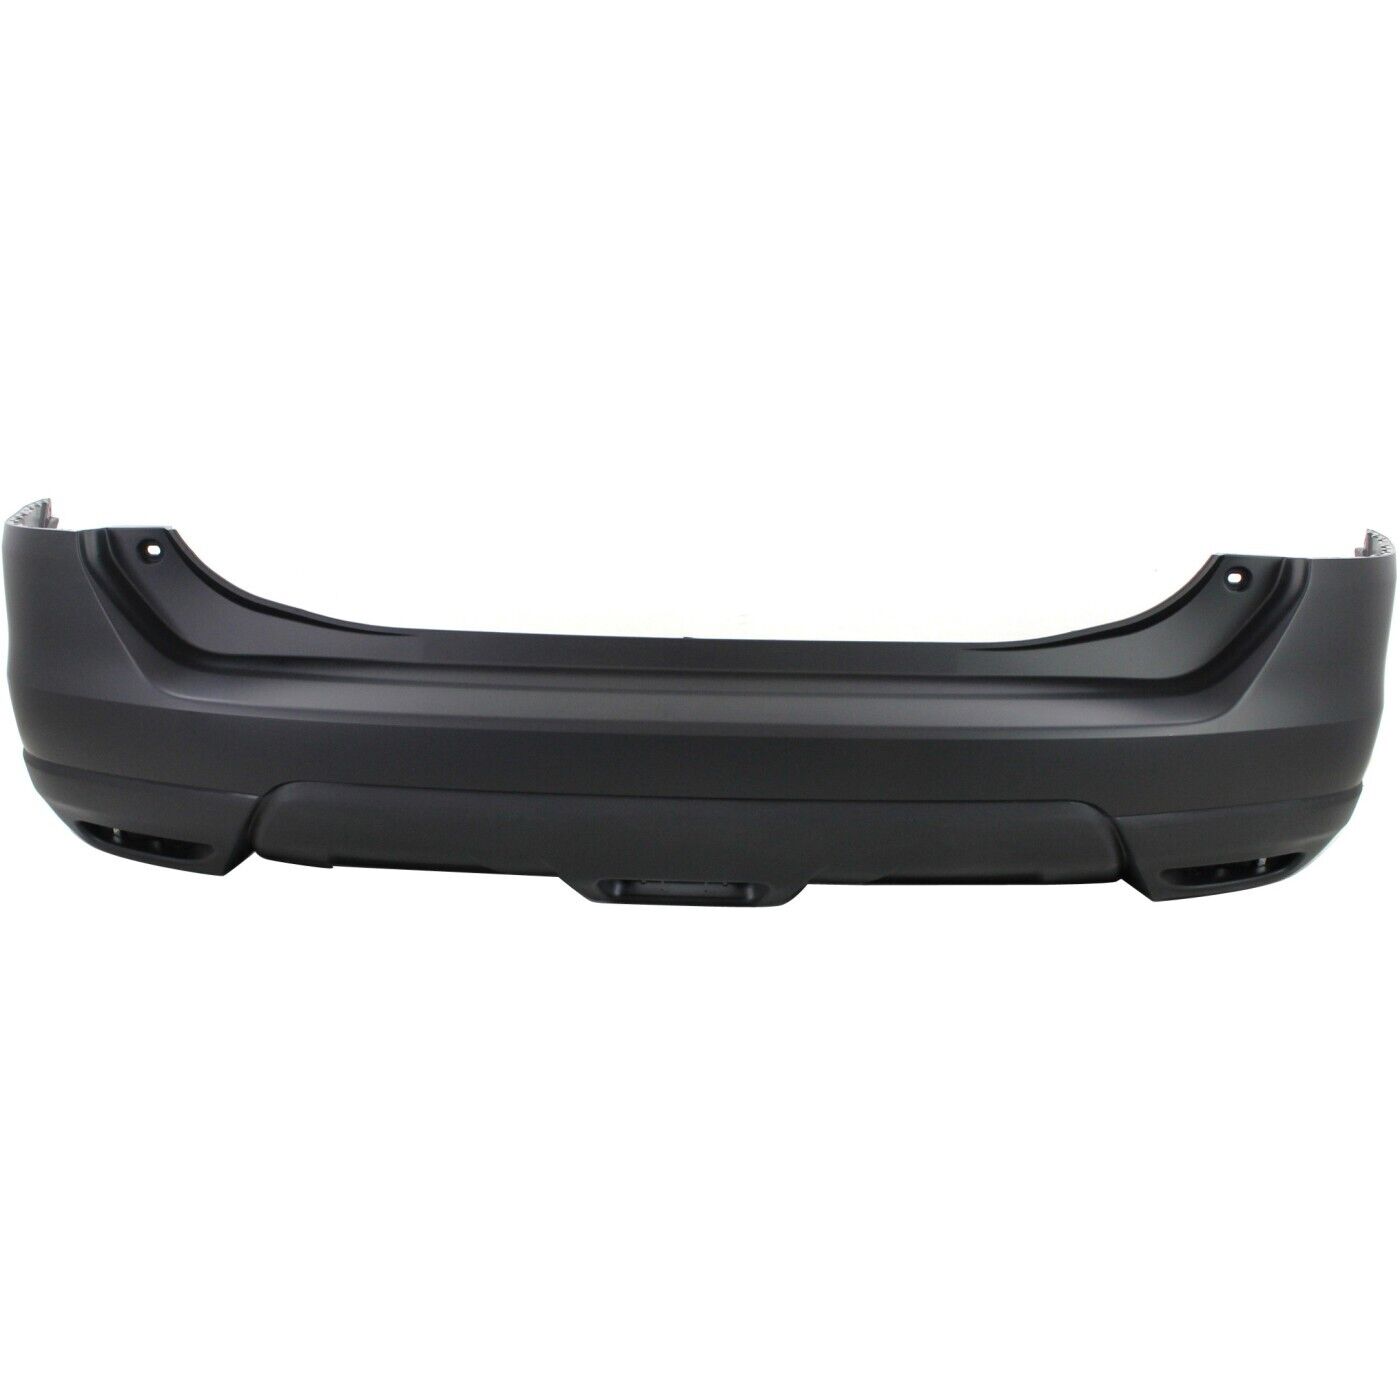 Rear Bumper Cover For 2014-2016 Nissan Rogue Primed